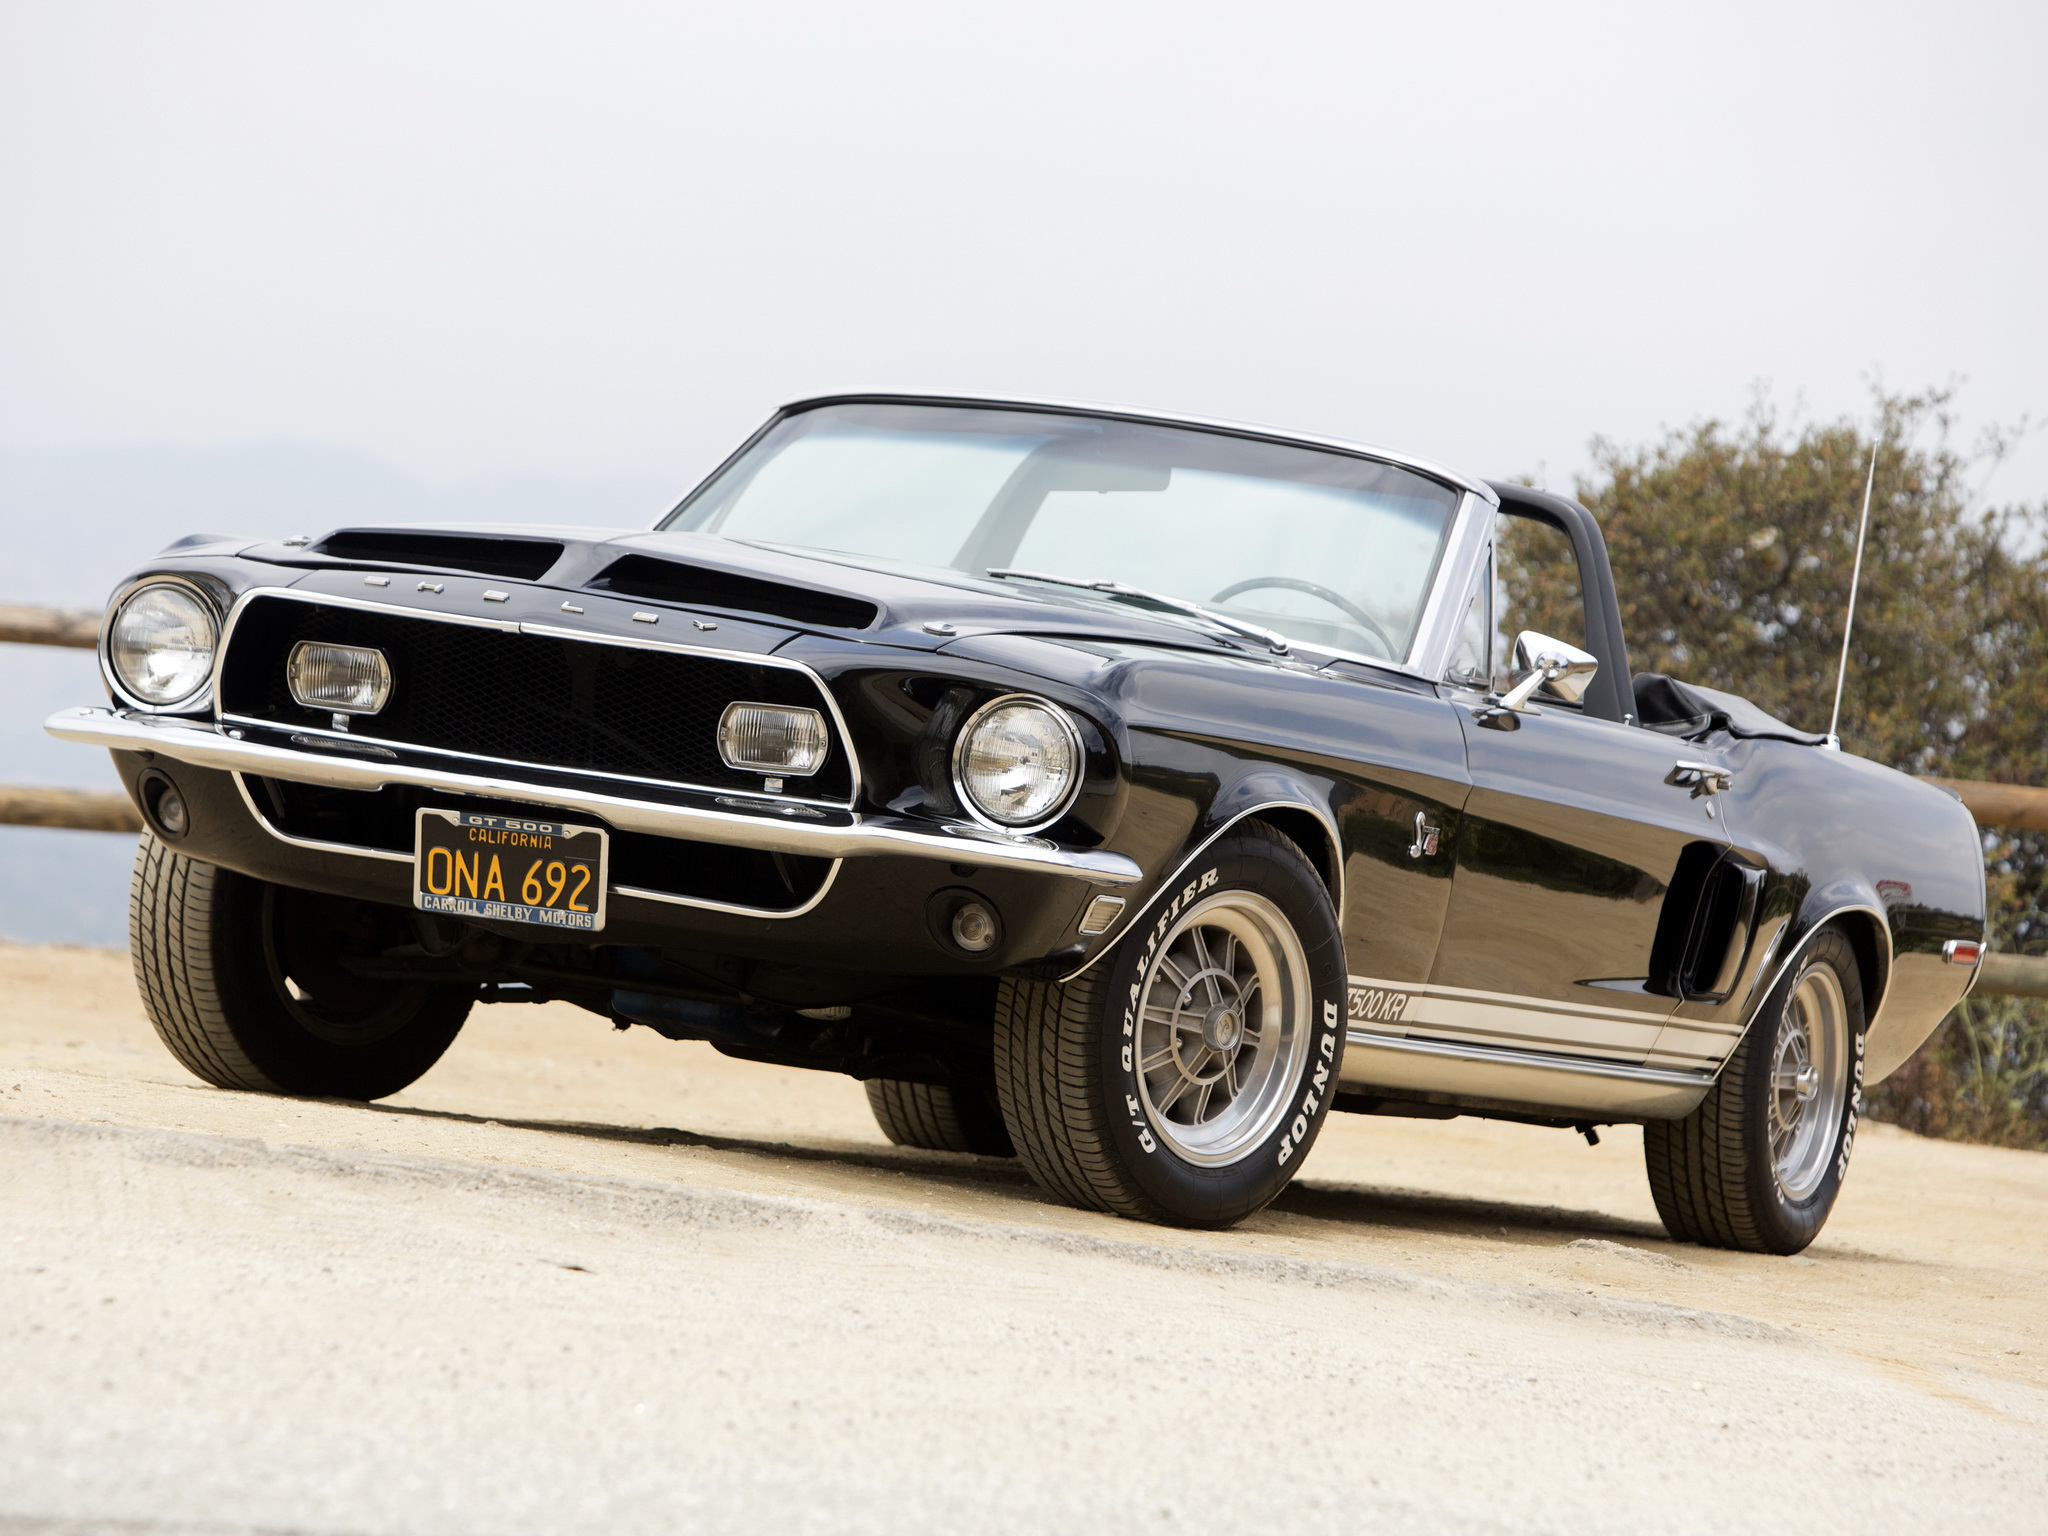 1968, Shelby, Gt500, K r, Convertible, Cougar, Mustang, Ford, Muscle, Supercar, Supercars, Classic Wallpaper